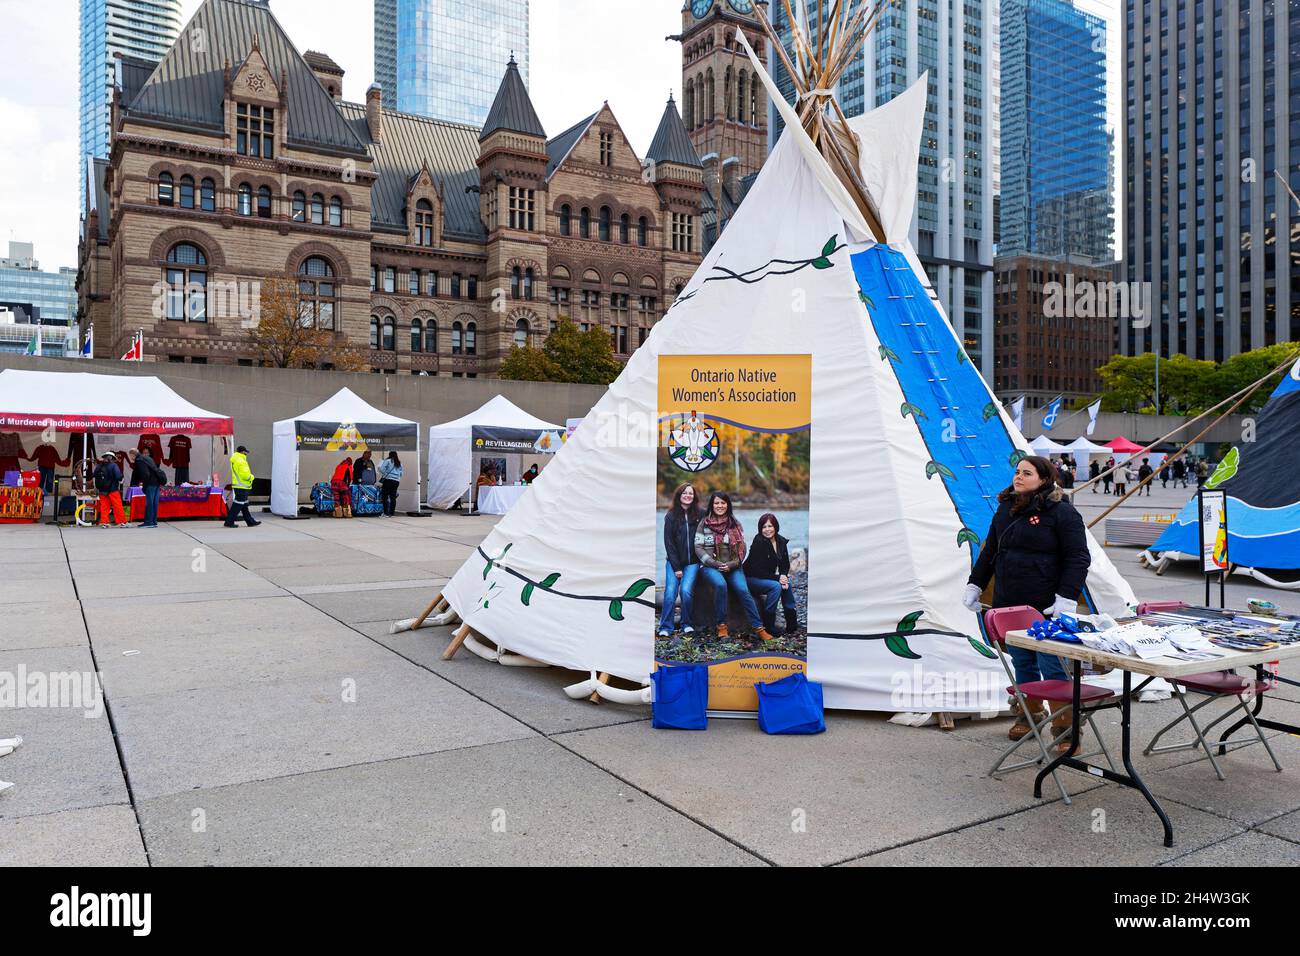 Teepee, Indigenous Legacy Gathering, le 4 novembre 2021 à Toronto, Nathan Phillips Square,Canada Banque D'Images